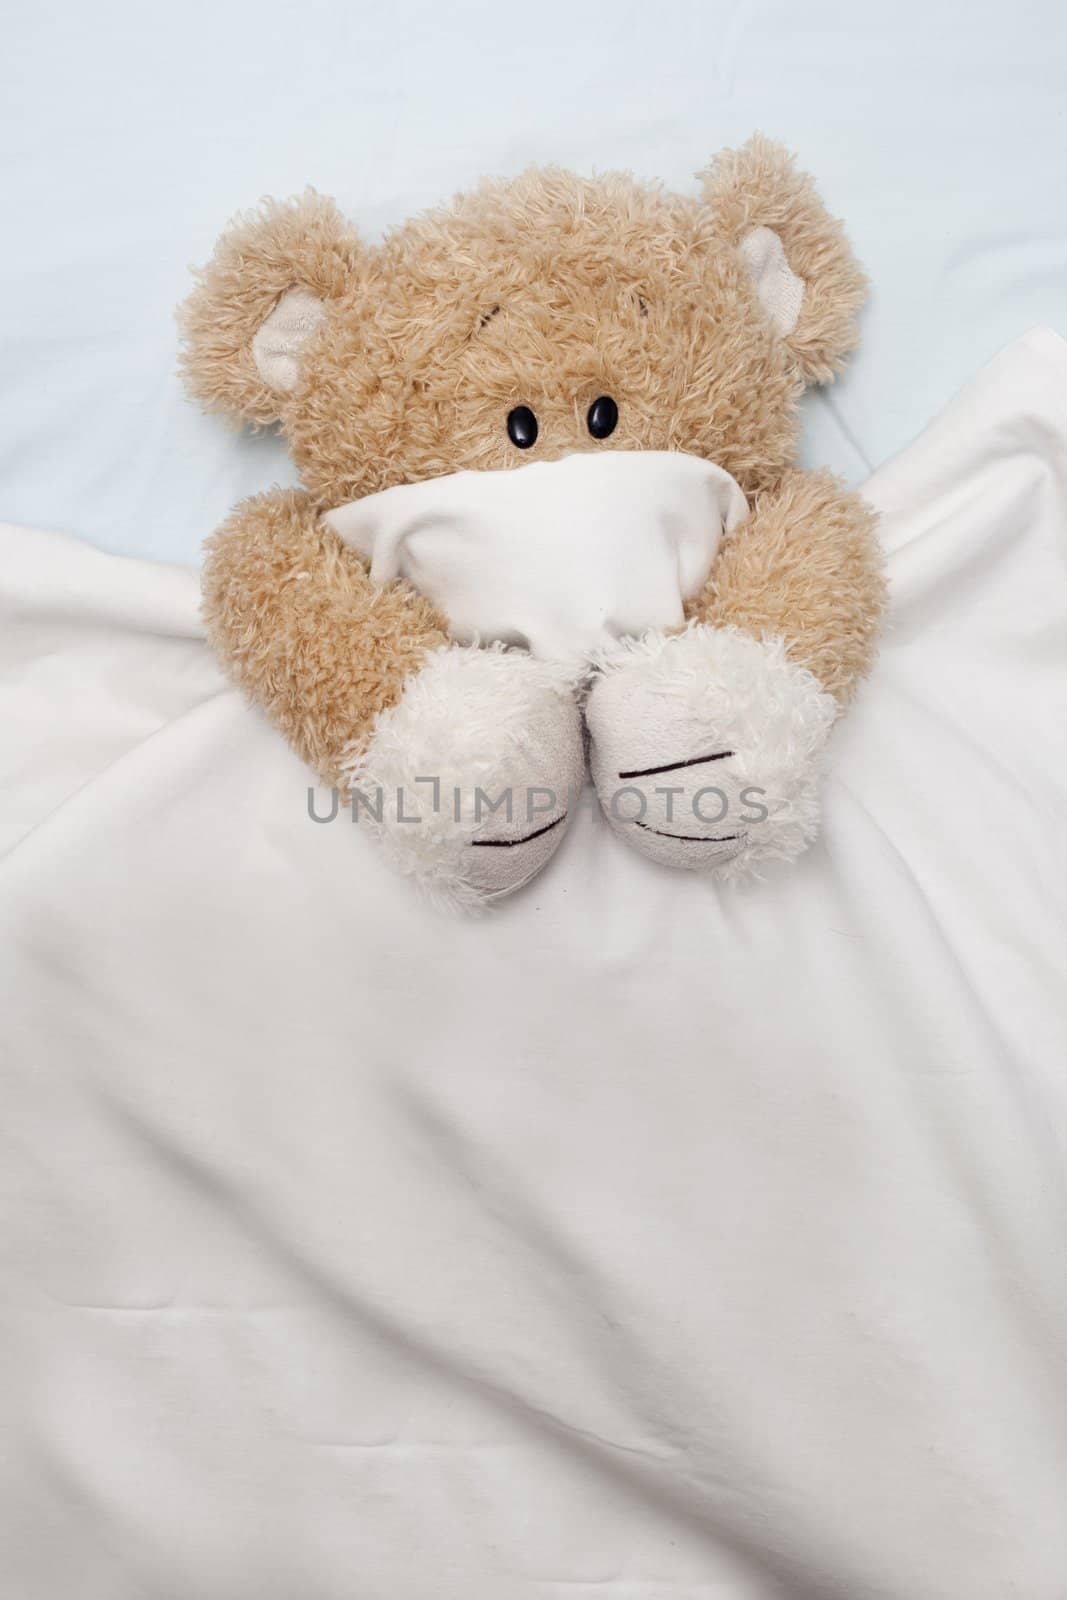 An adorable teddy bear laying in bed, scared, under the sheets.